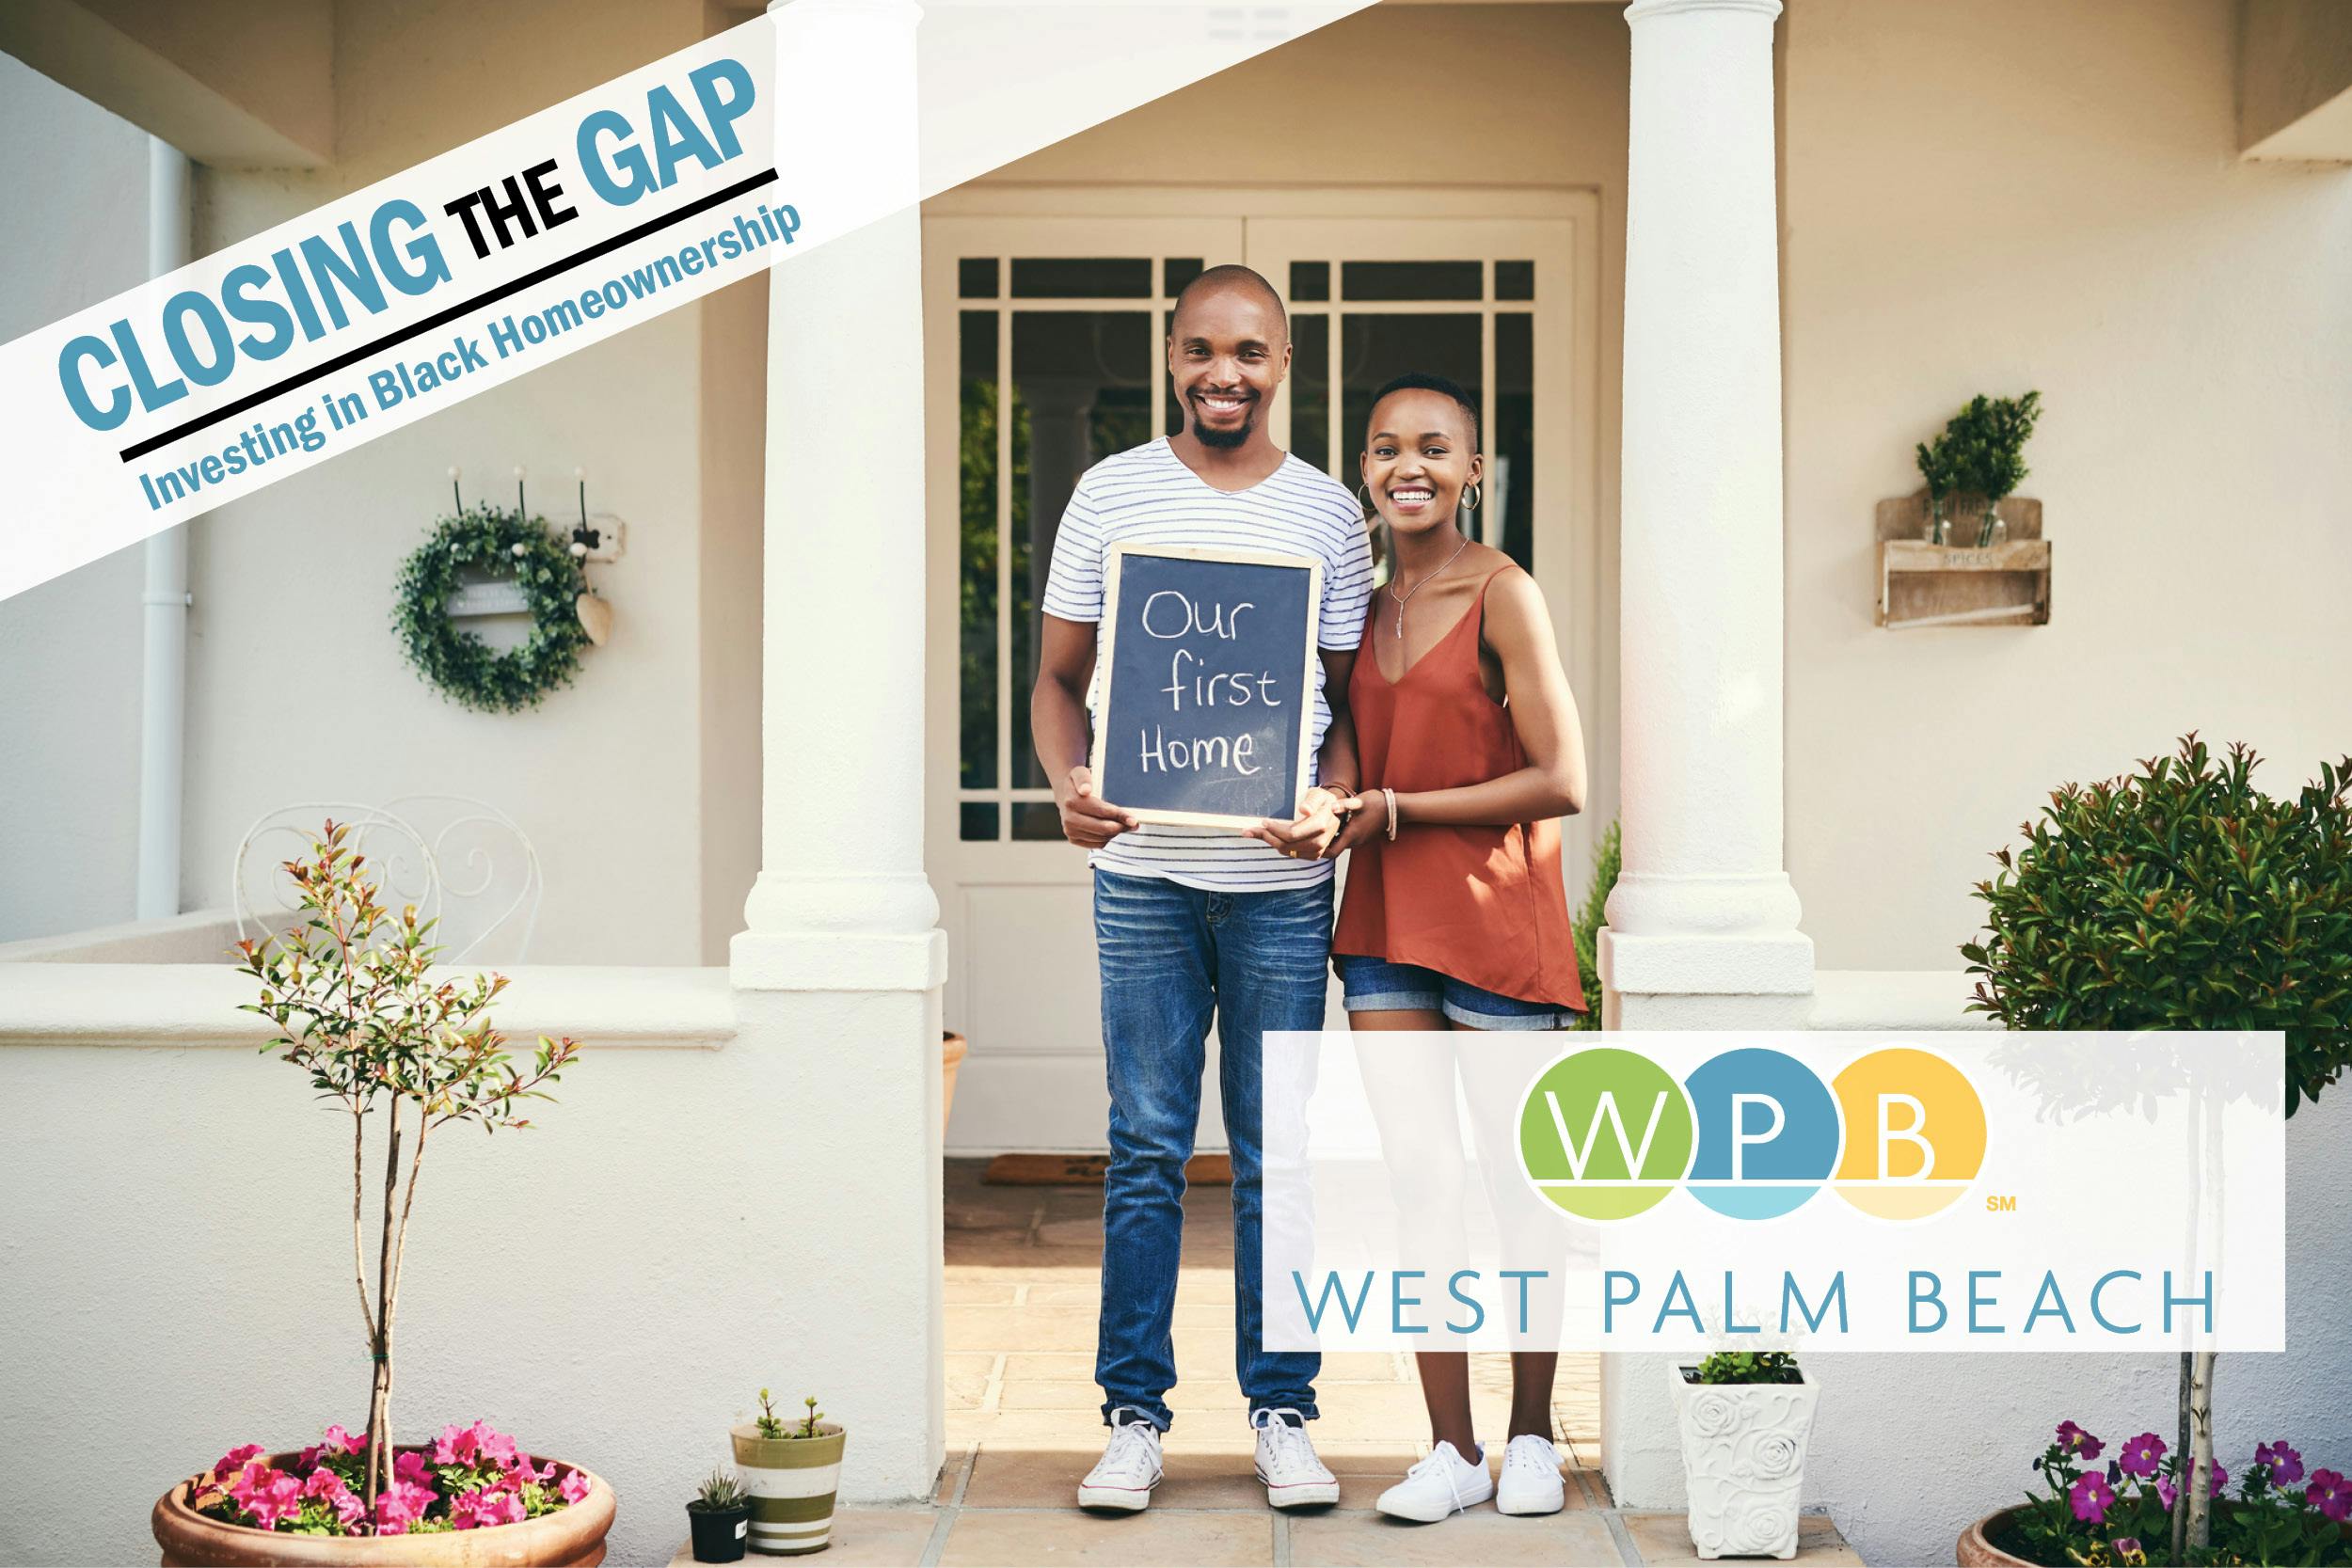 Two people who purchased a home standing on the front steps holding a sign that says "our first home".